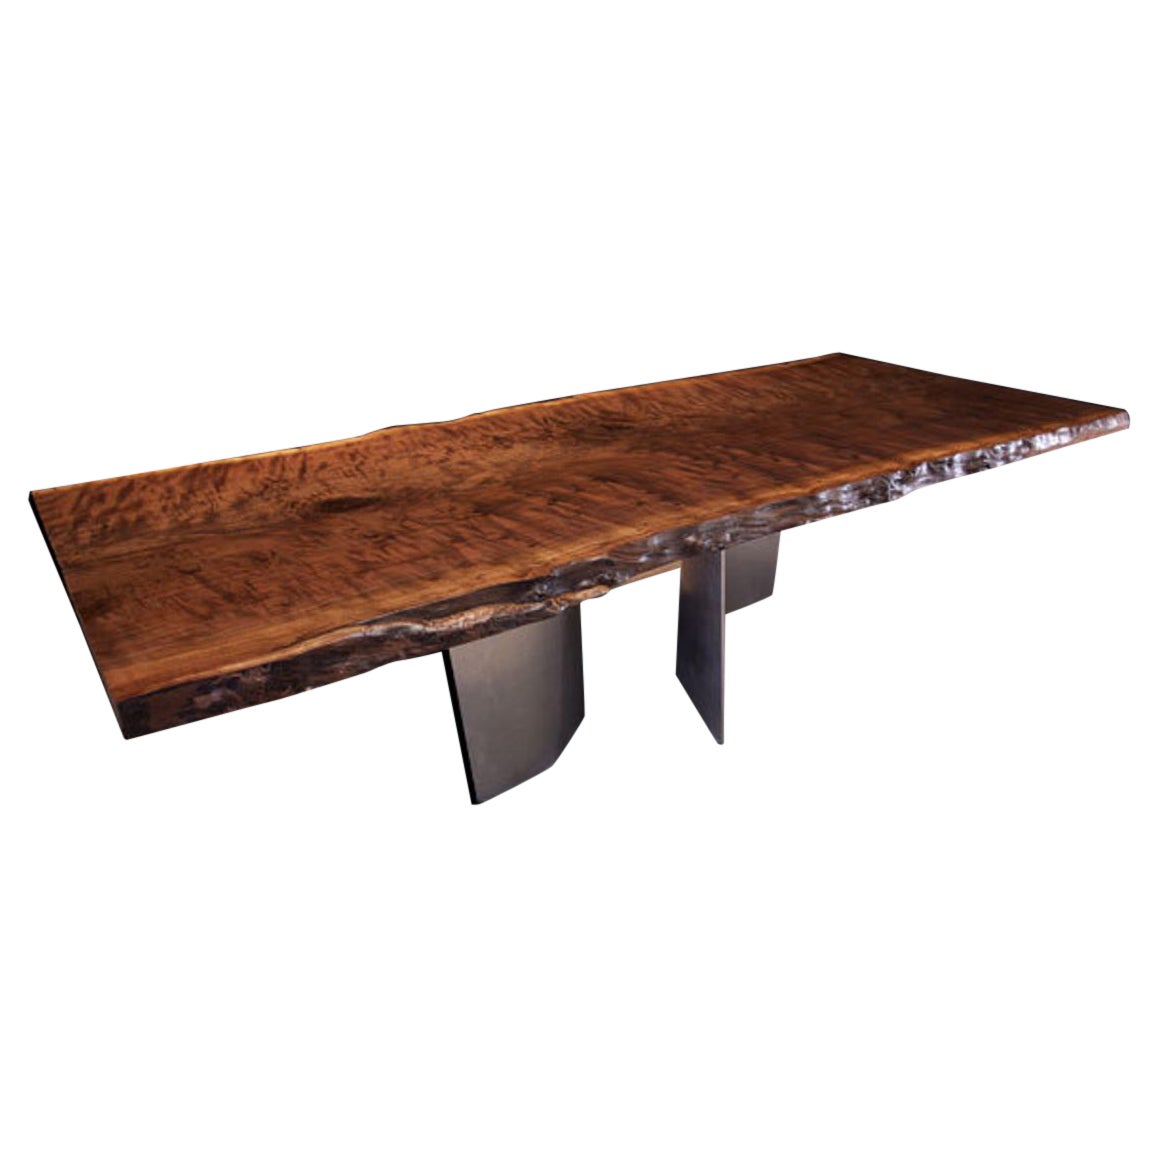 Organic Black Walnut Live Edge Table with Curved Steel Legs For Sale